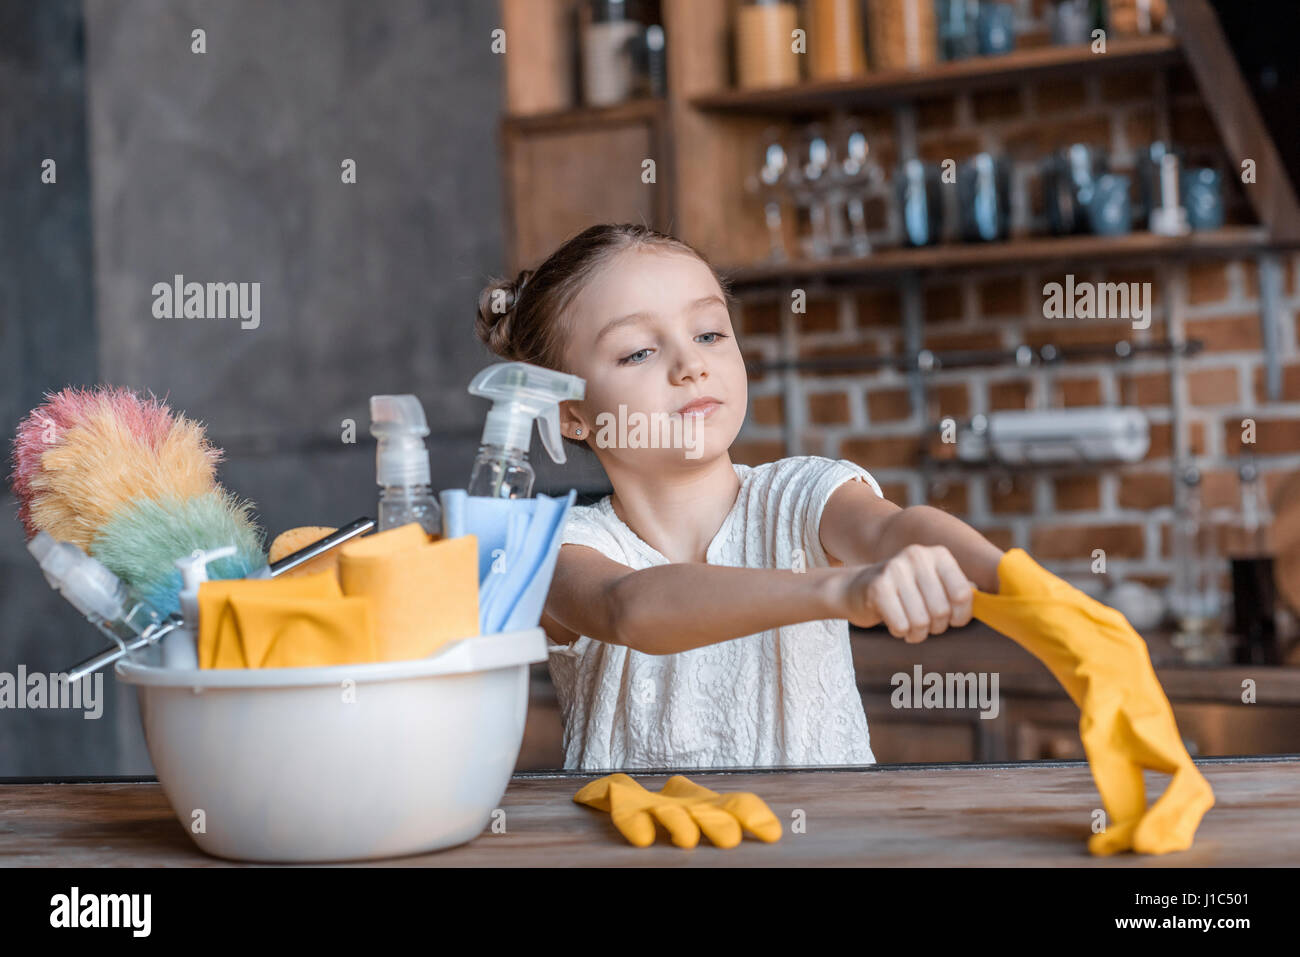 Adorable girl with rubber gloves and different cleaning supplies at home Stock Photo